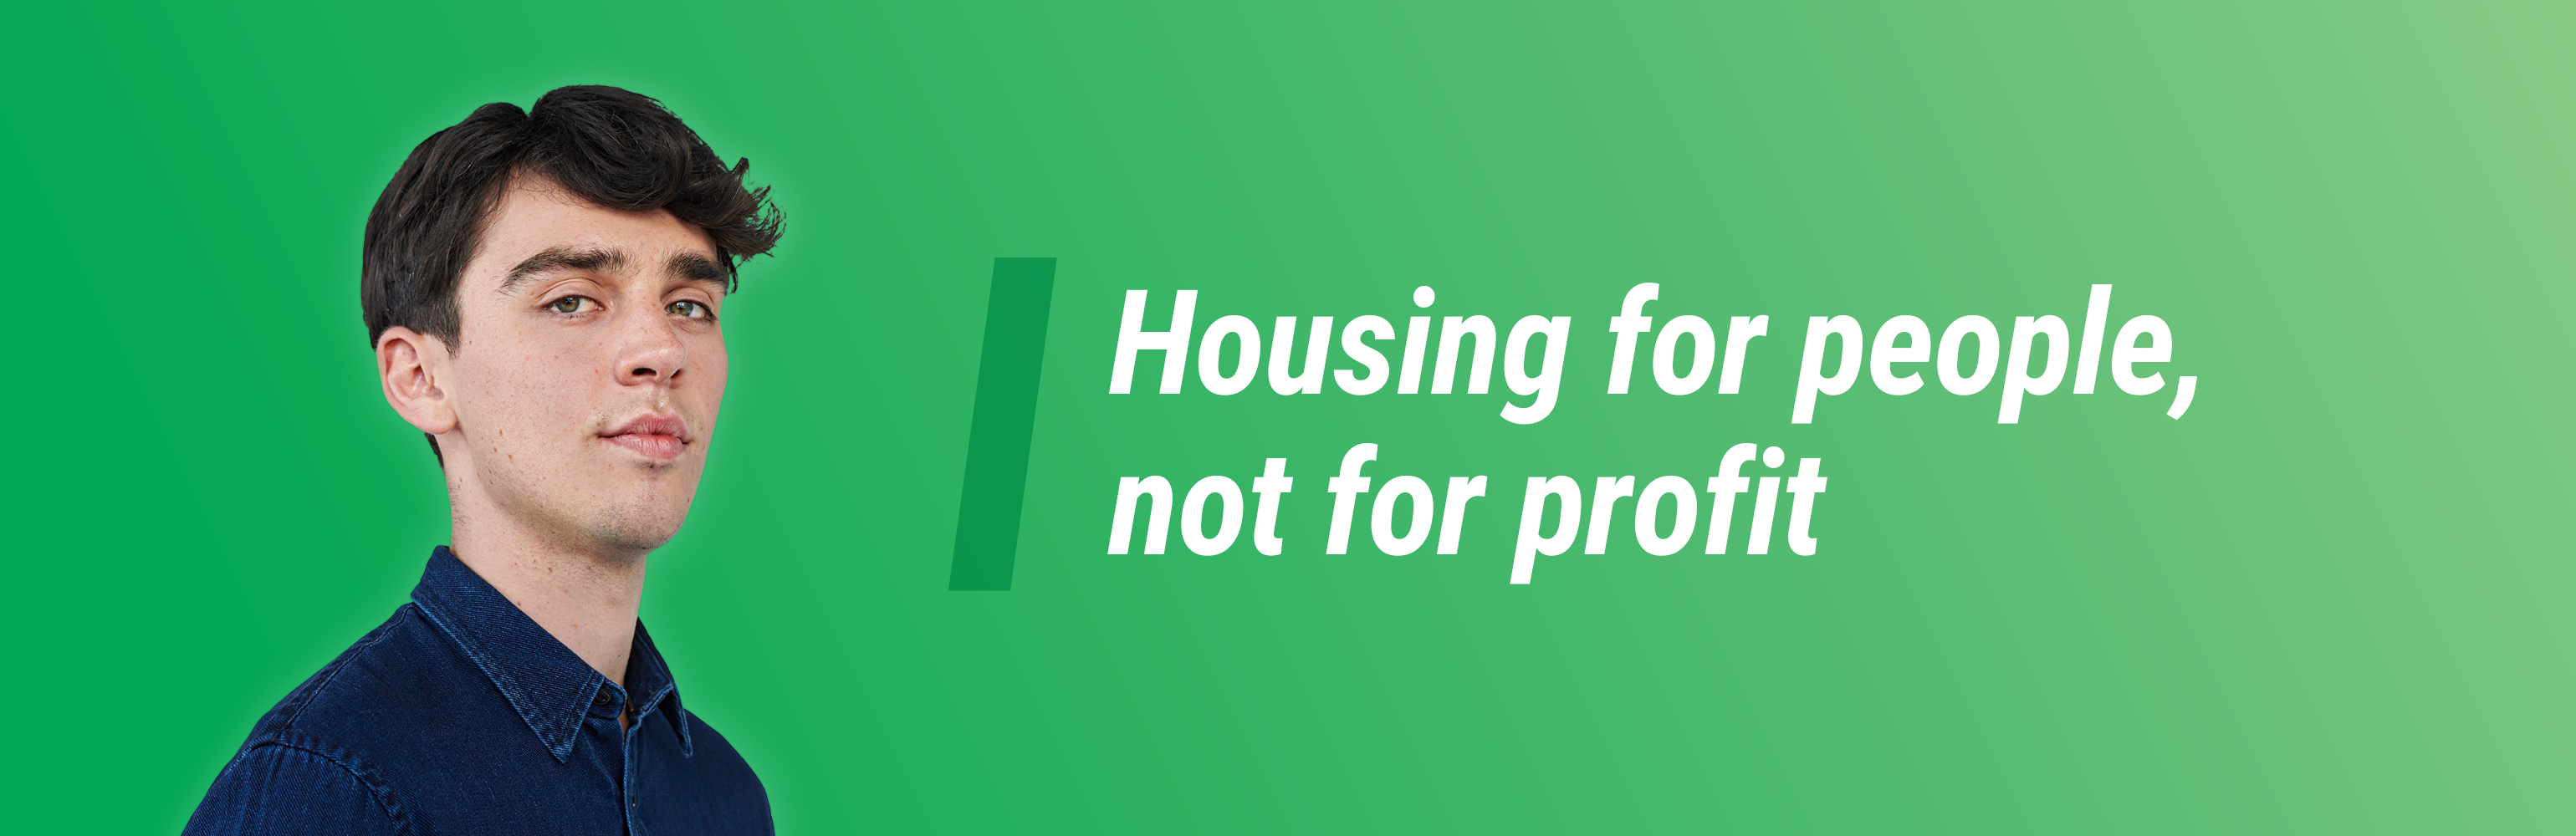 'Housing for people, not profit'